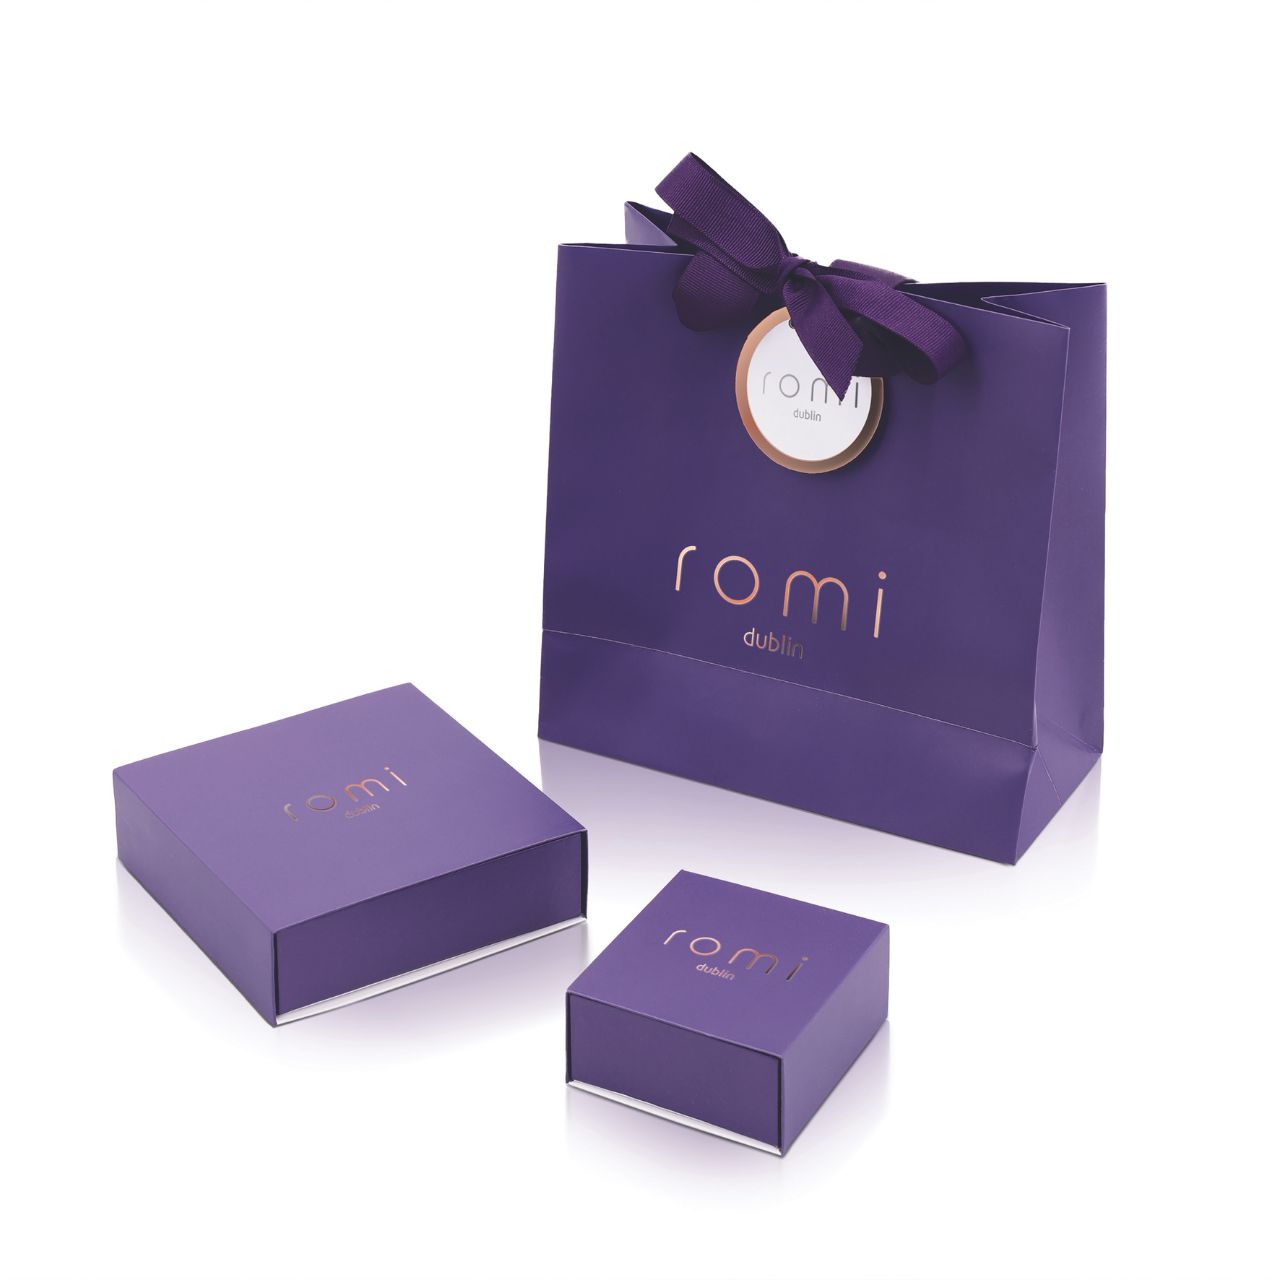 Romi Dublin Silver Pave Disc Pendant  This easy-to-wear jewellery collection was inspired by daughter Romi who loves to style and accessorise. An outfit isn’t complete until the perfect pieces of jewellery and accessories have been selected to enhance it.